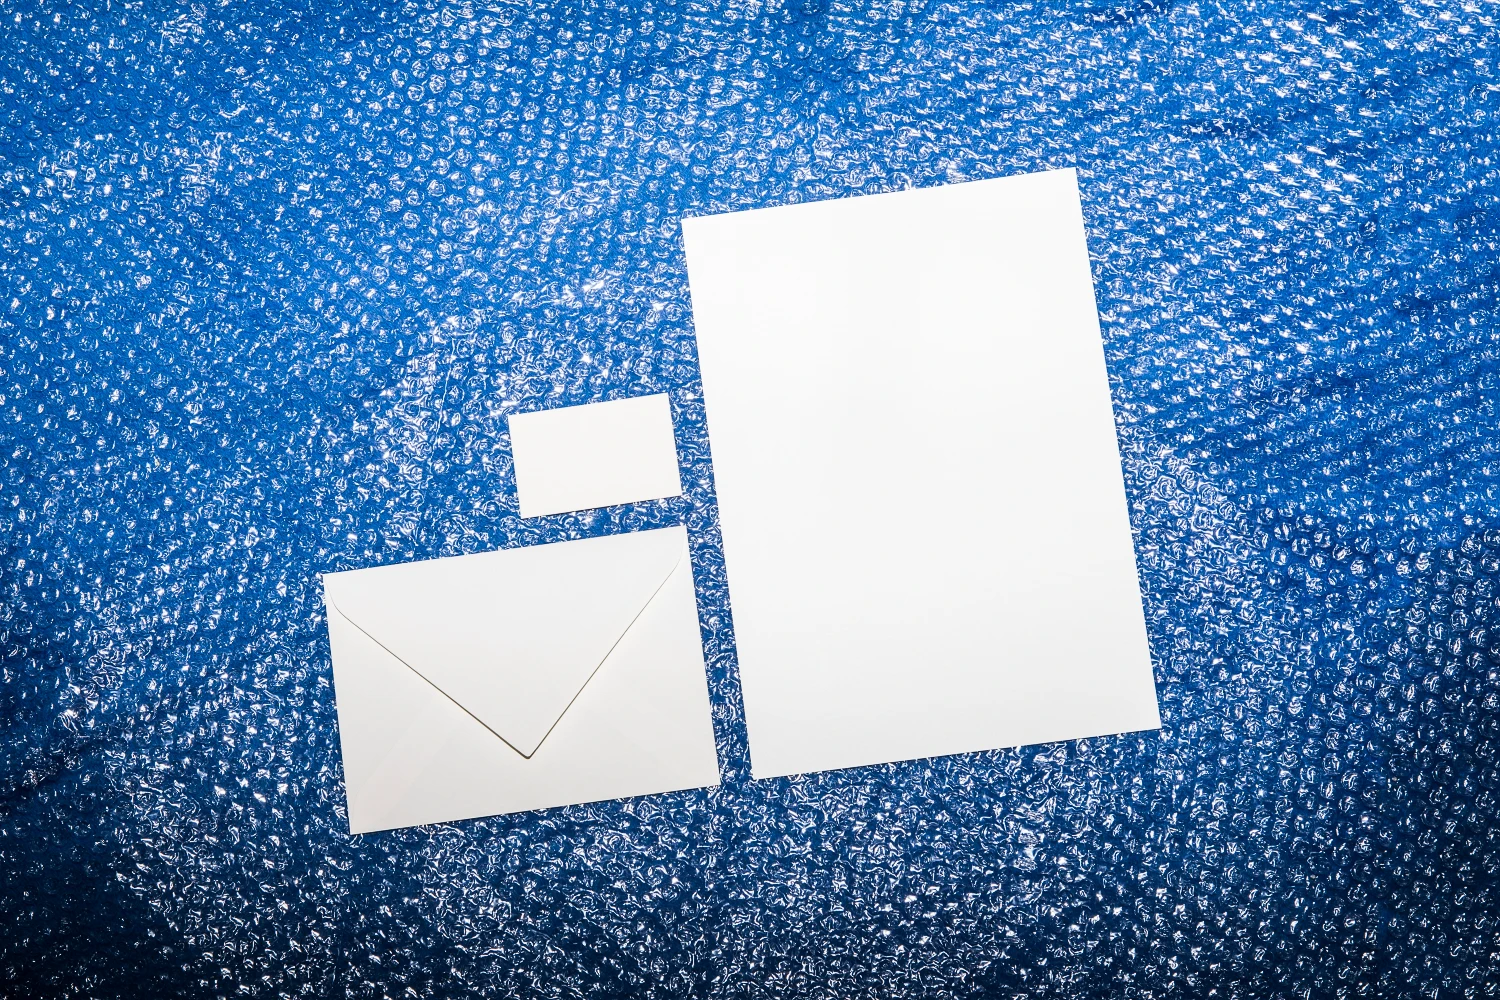 Stationery mockup placed over bubble wrap film.